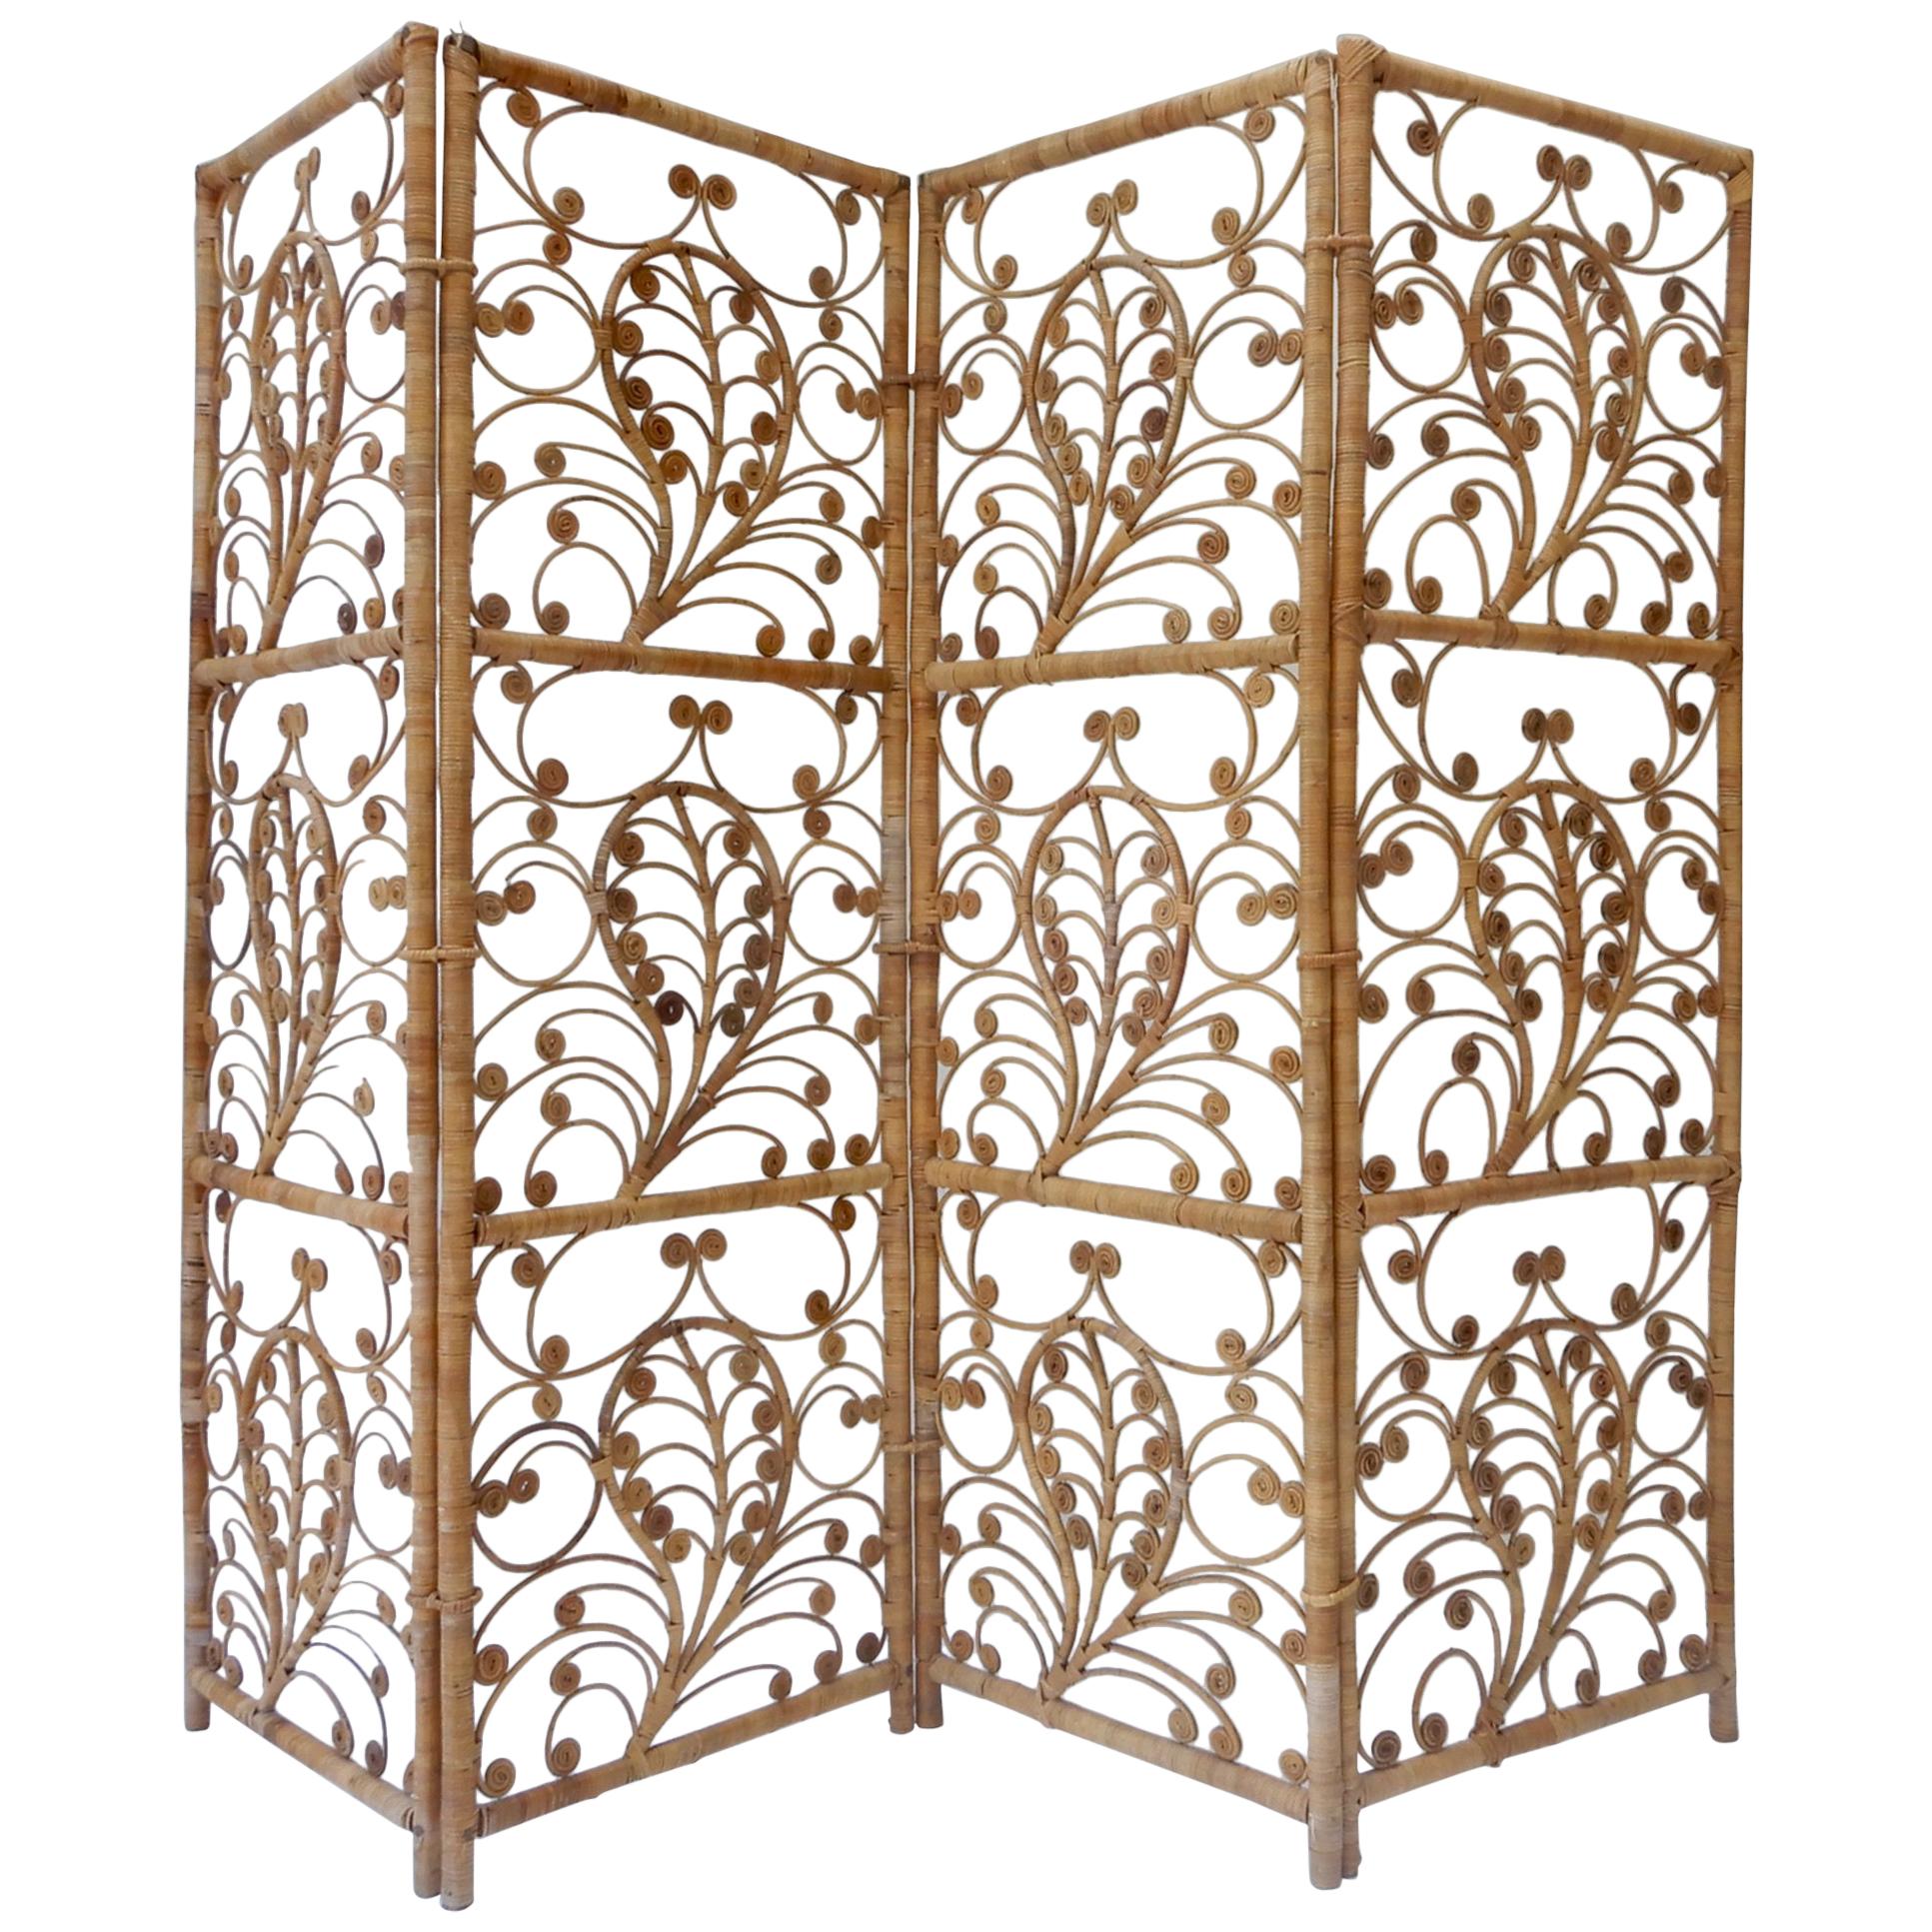 Four-Panel Rattan Screen Room Divider, 1940s